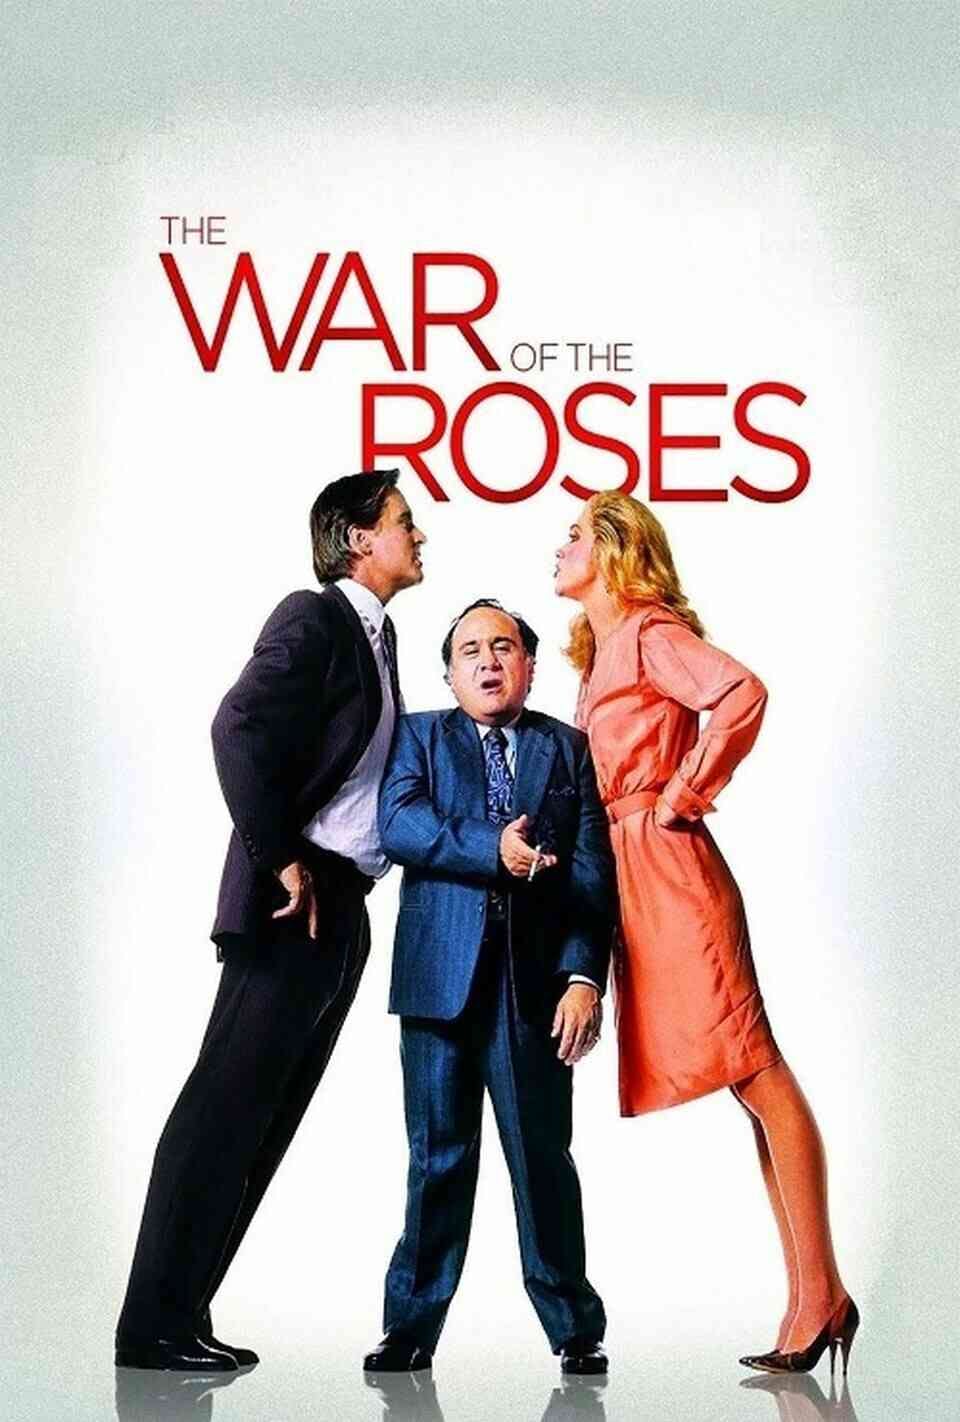 Read War of the Roses screenplay.